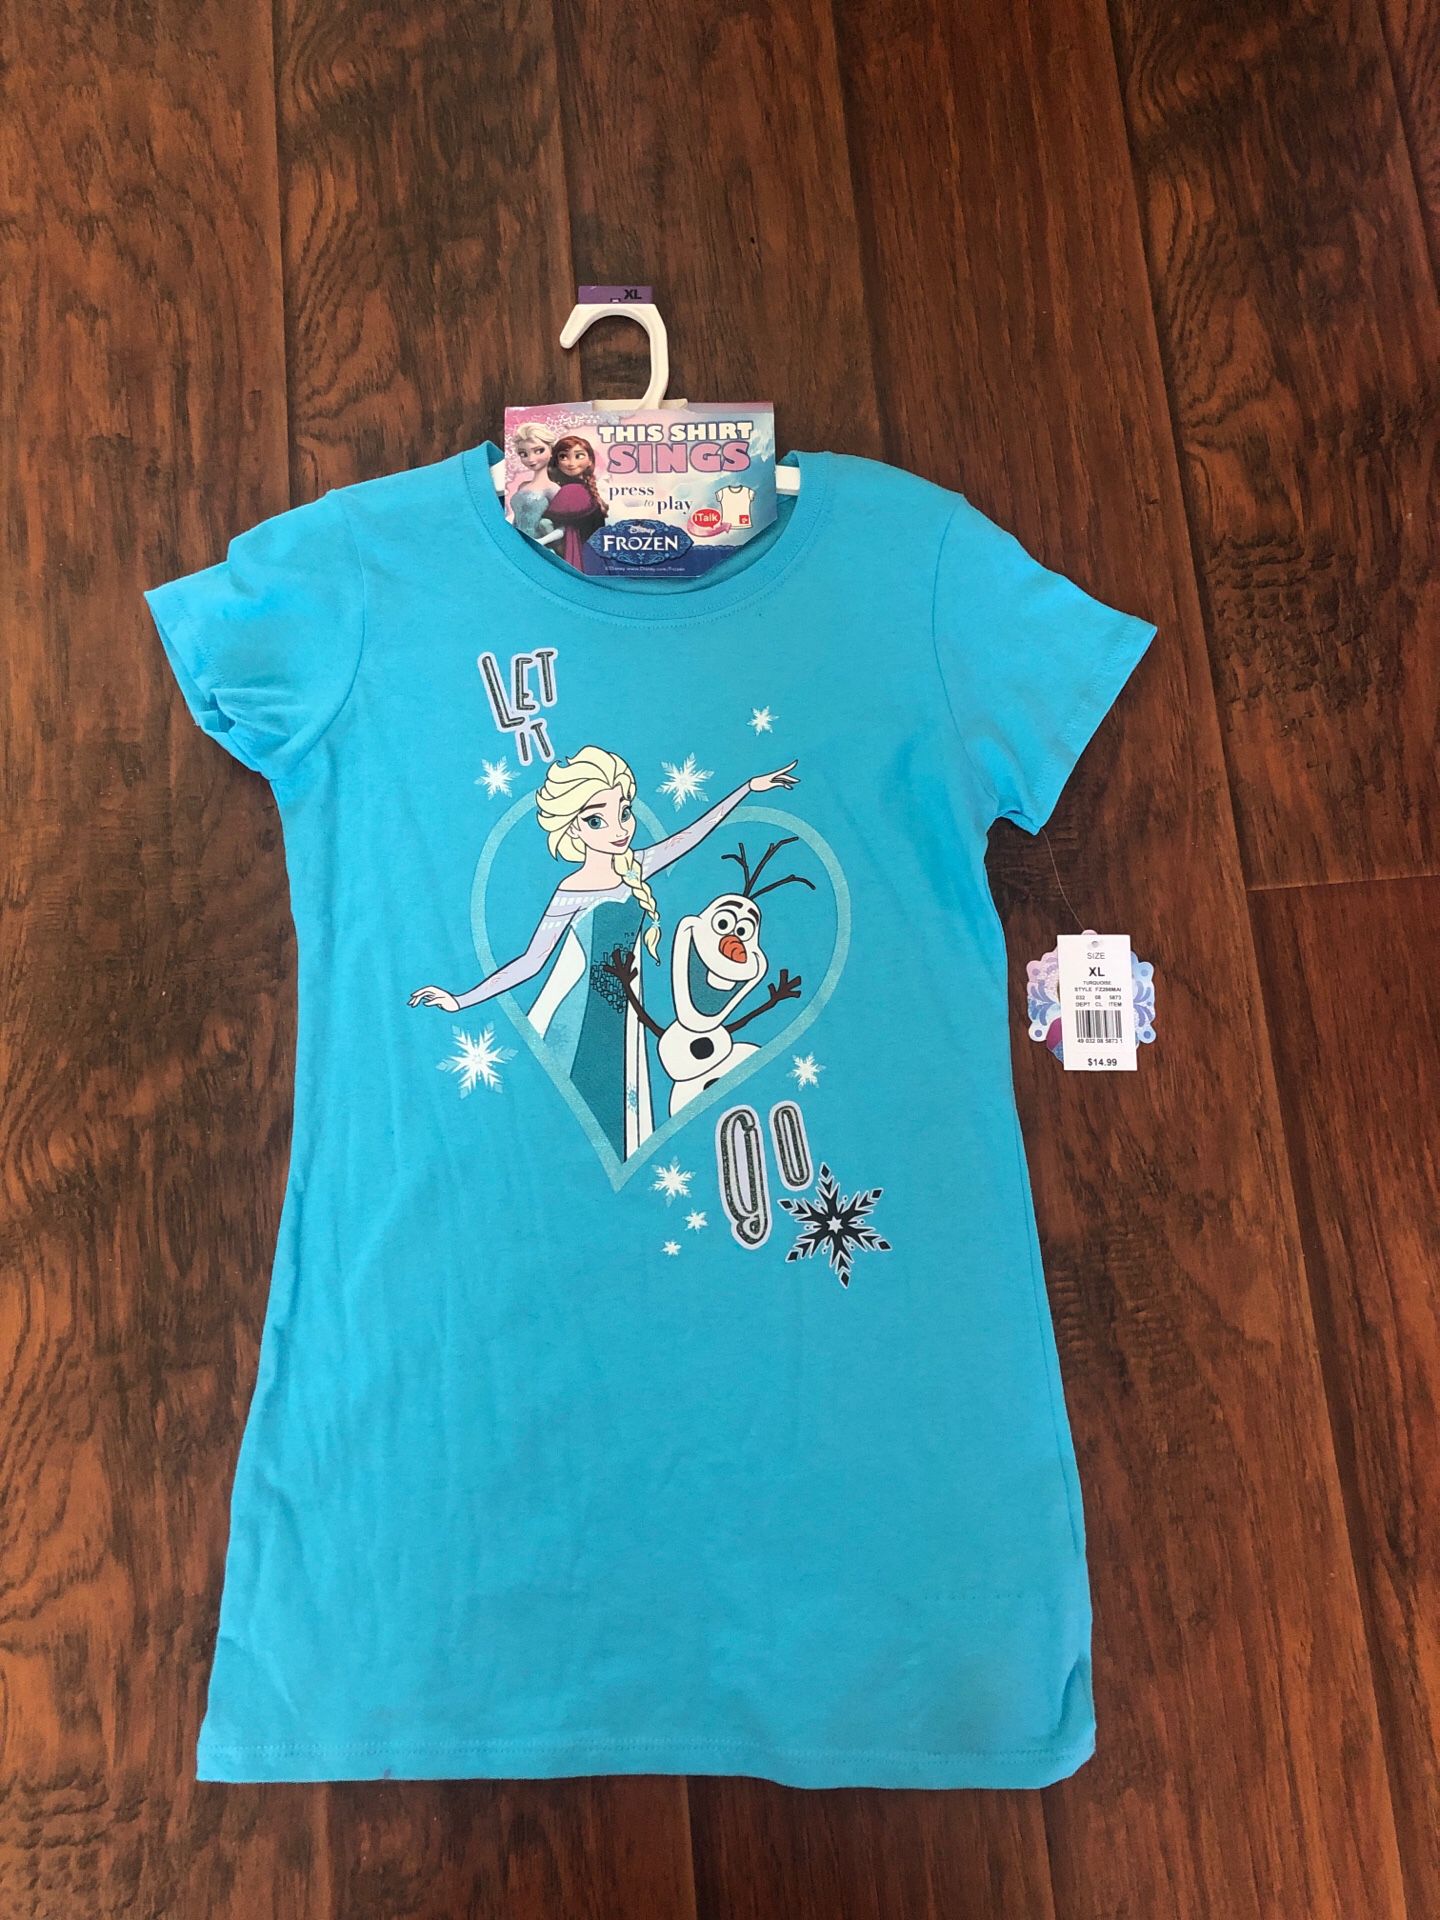 Frozen girls T-shirt with Elsa and Olaf